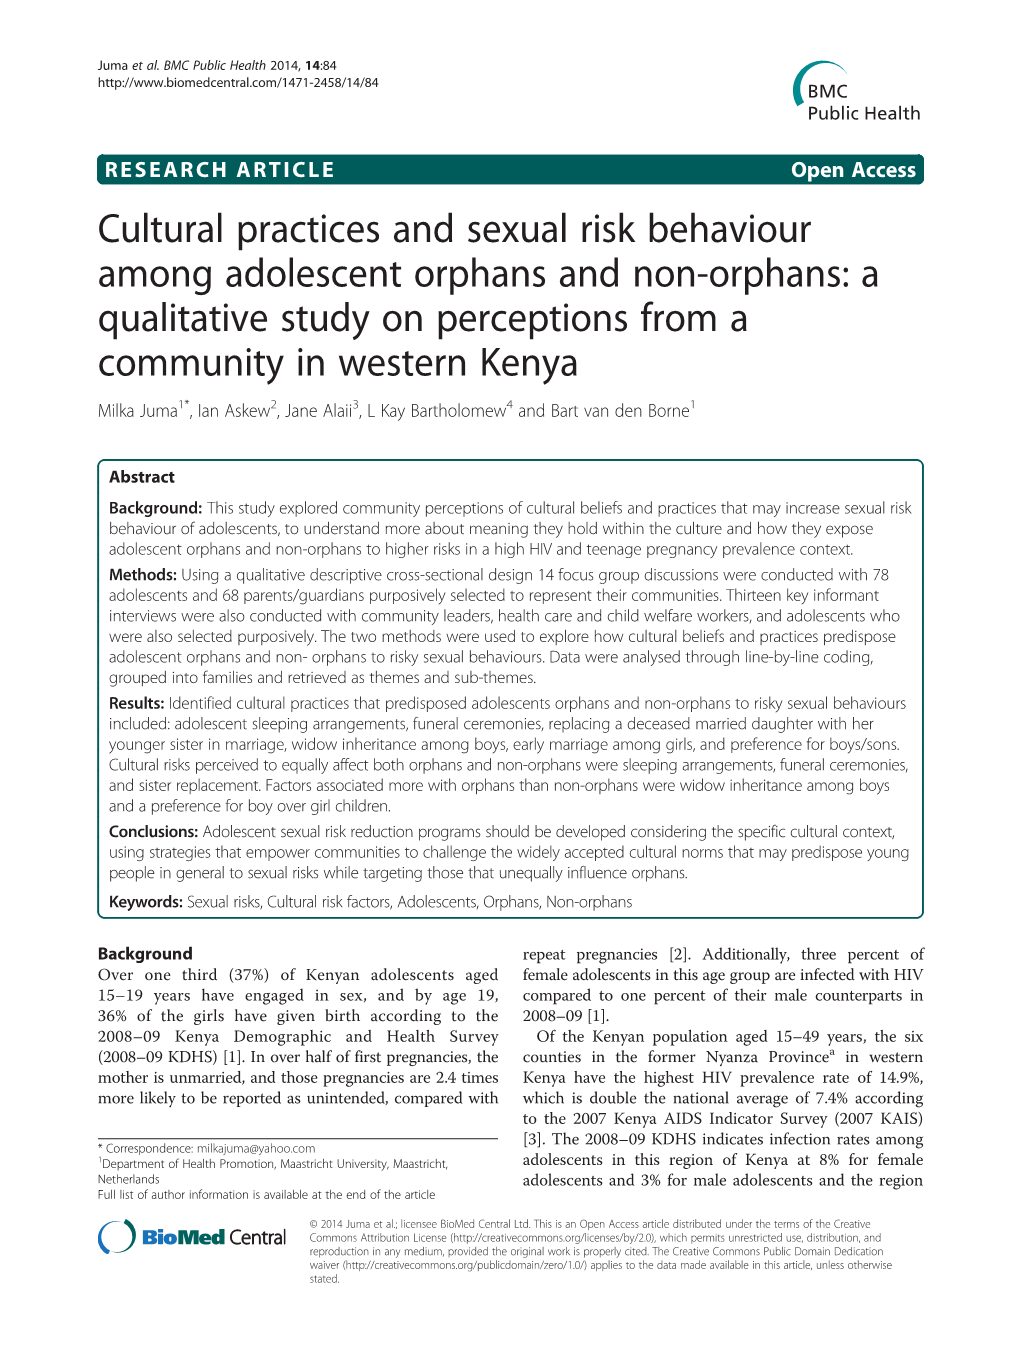 Cultural Practices and Sexual Risk Behaviour Among Adolescent